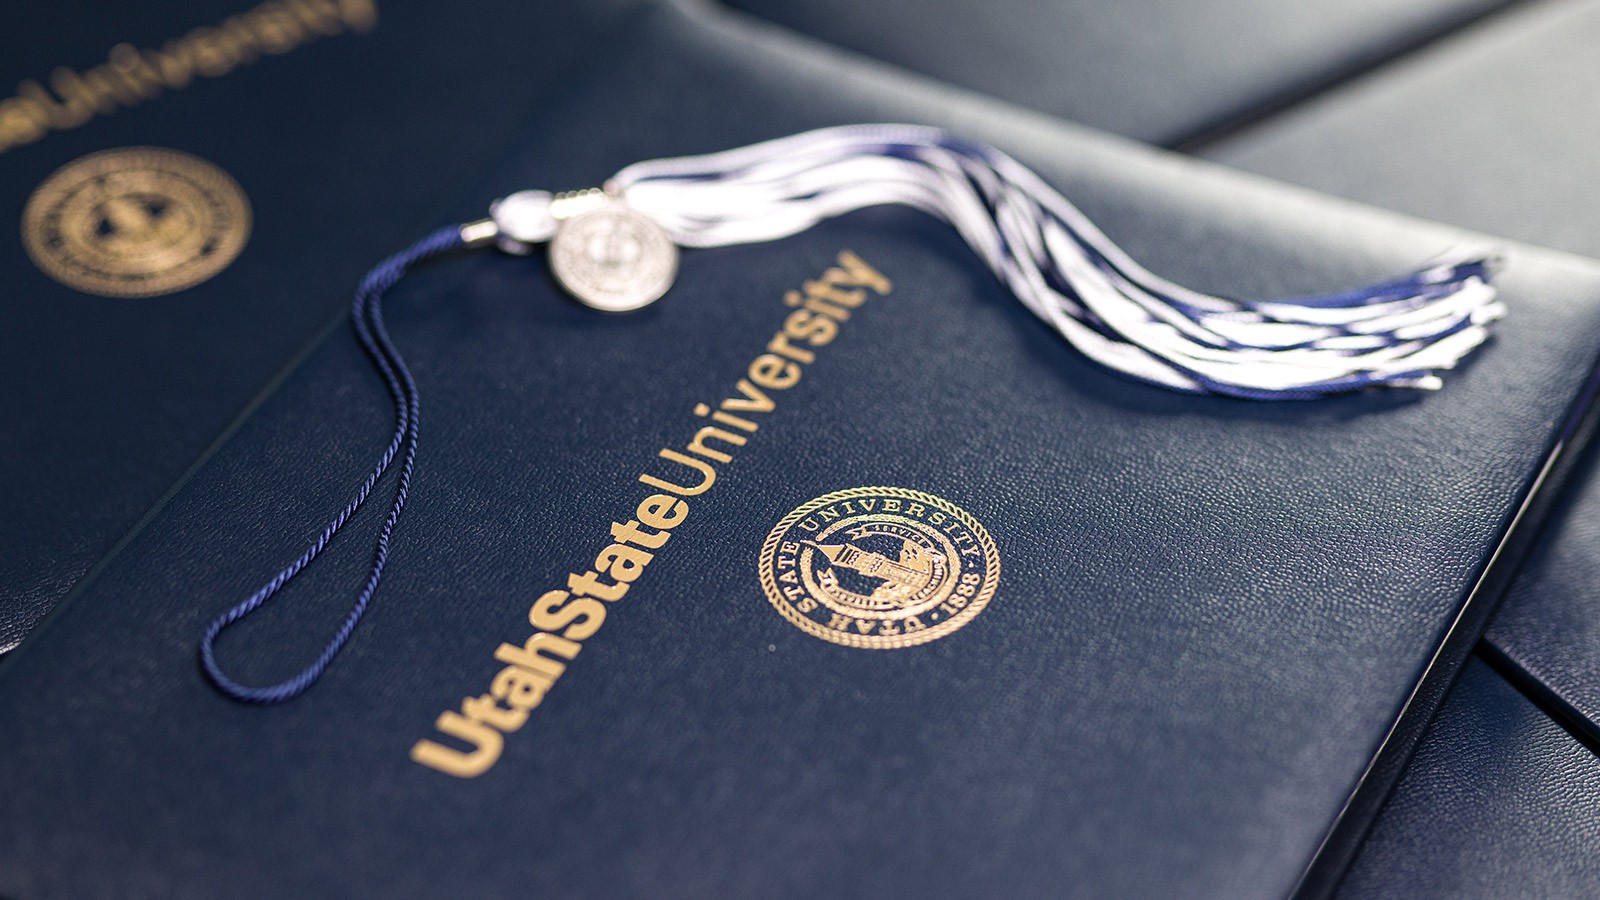 Three Individuals to Receive Honorary Degrees at USU's 134th Commencement